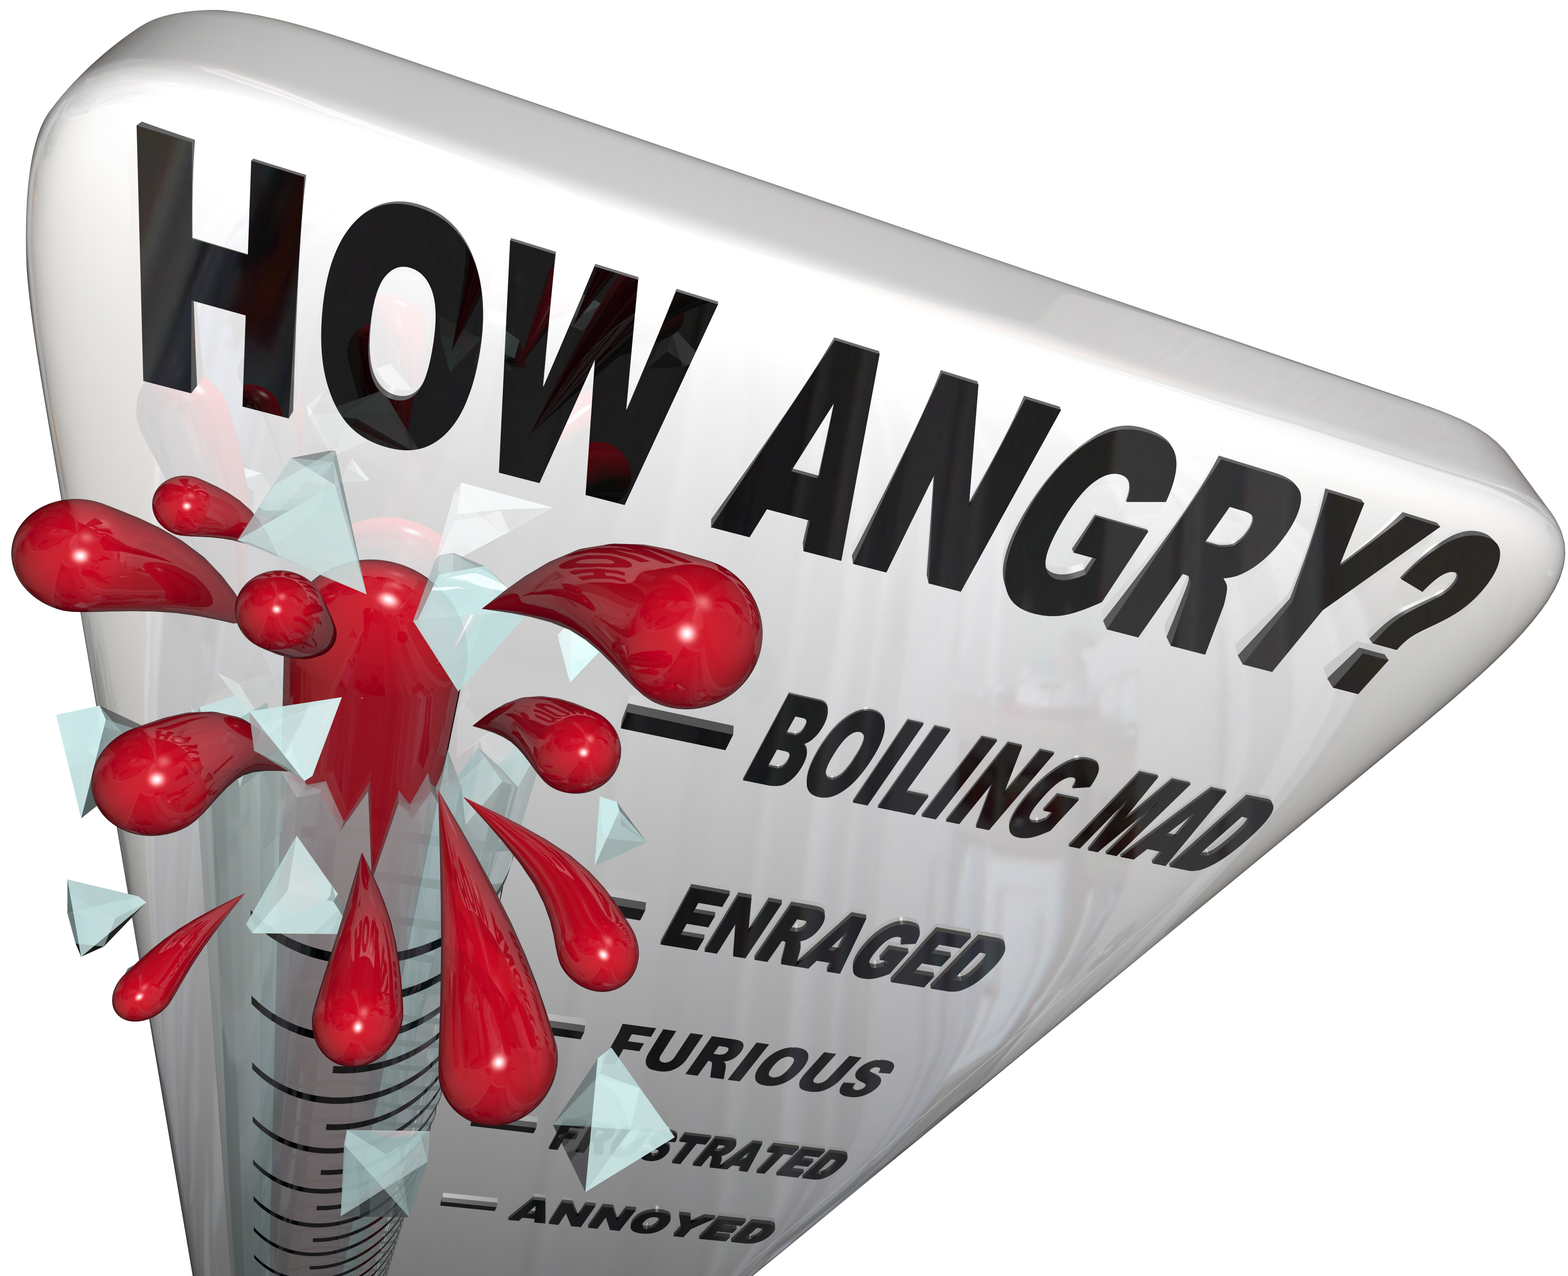 Emotions Such As Fear Anger Grief And Many Others Can Negatively